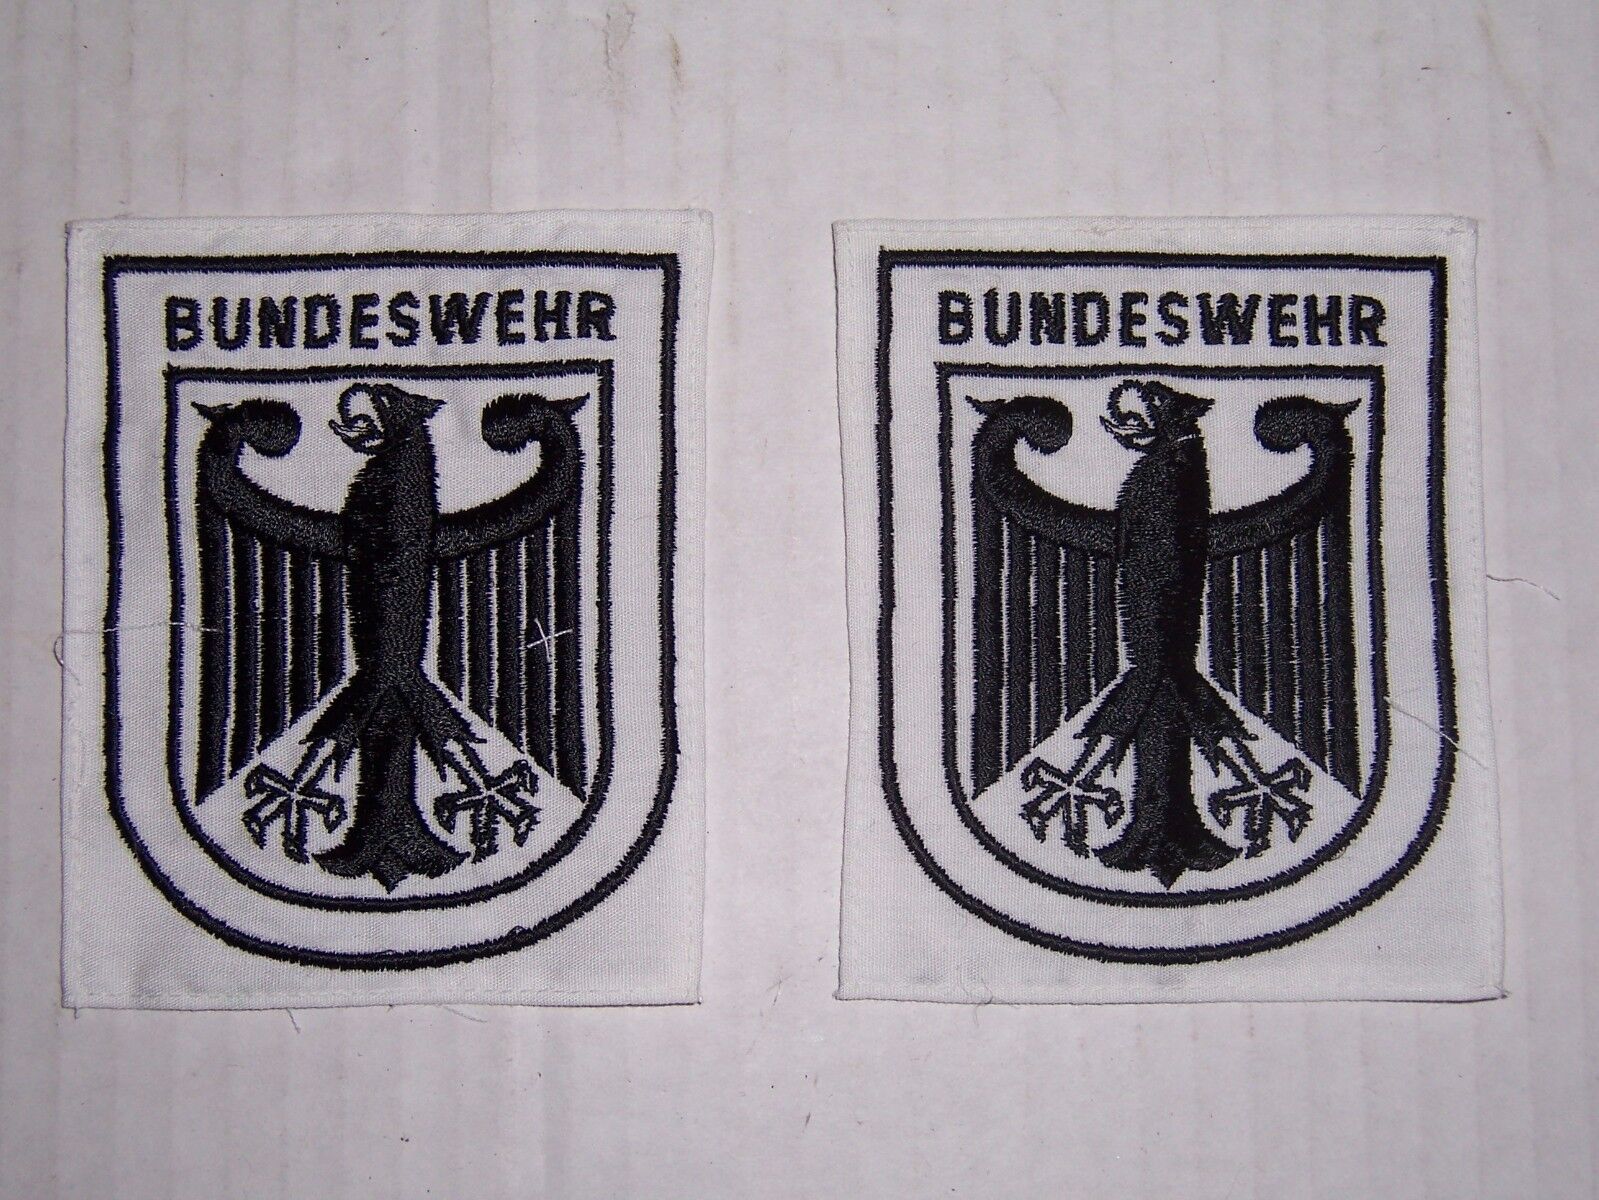 2 BUNDESWEHR Patches GERMAN MILITARY  EMBROIDERED CLOTH PATCH New 